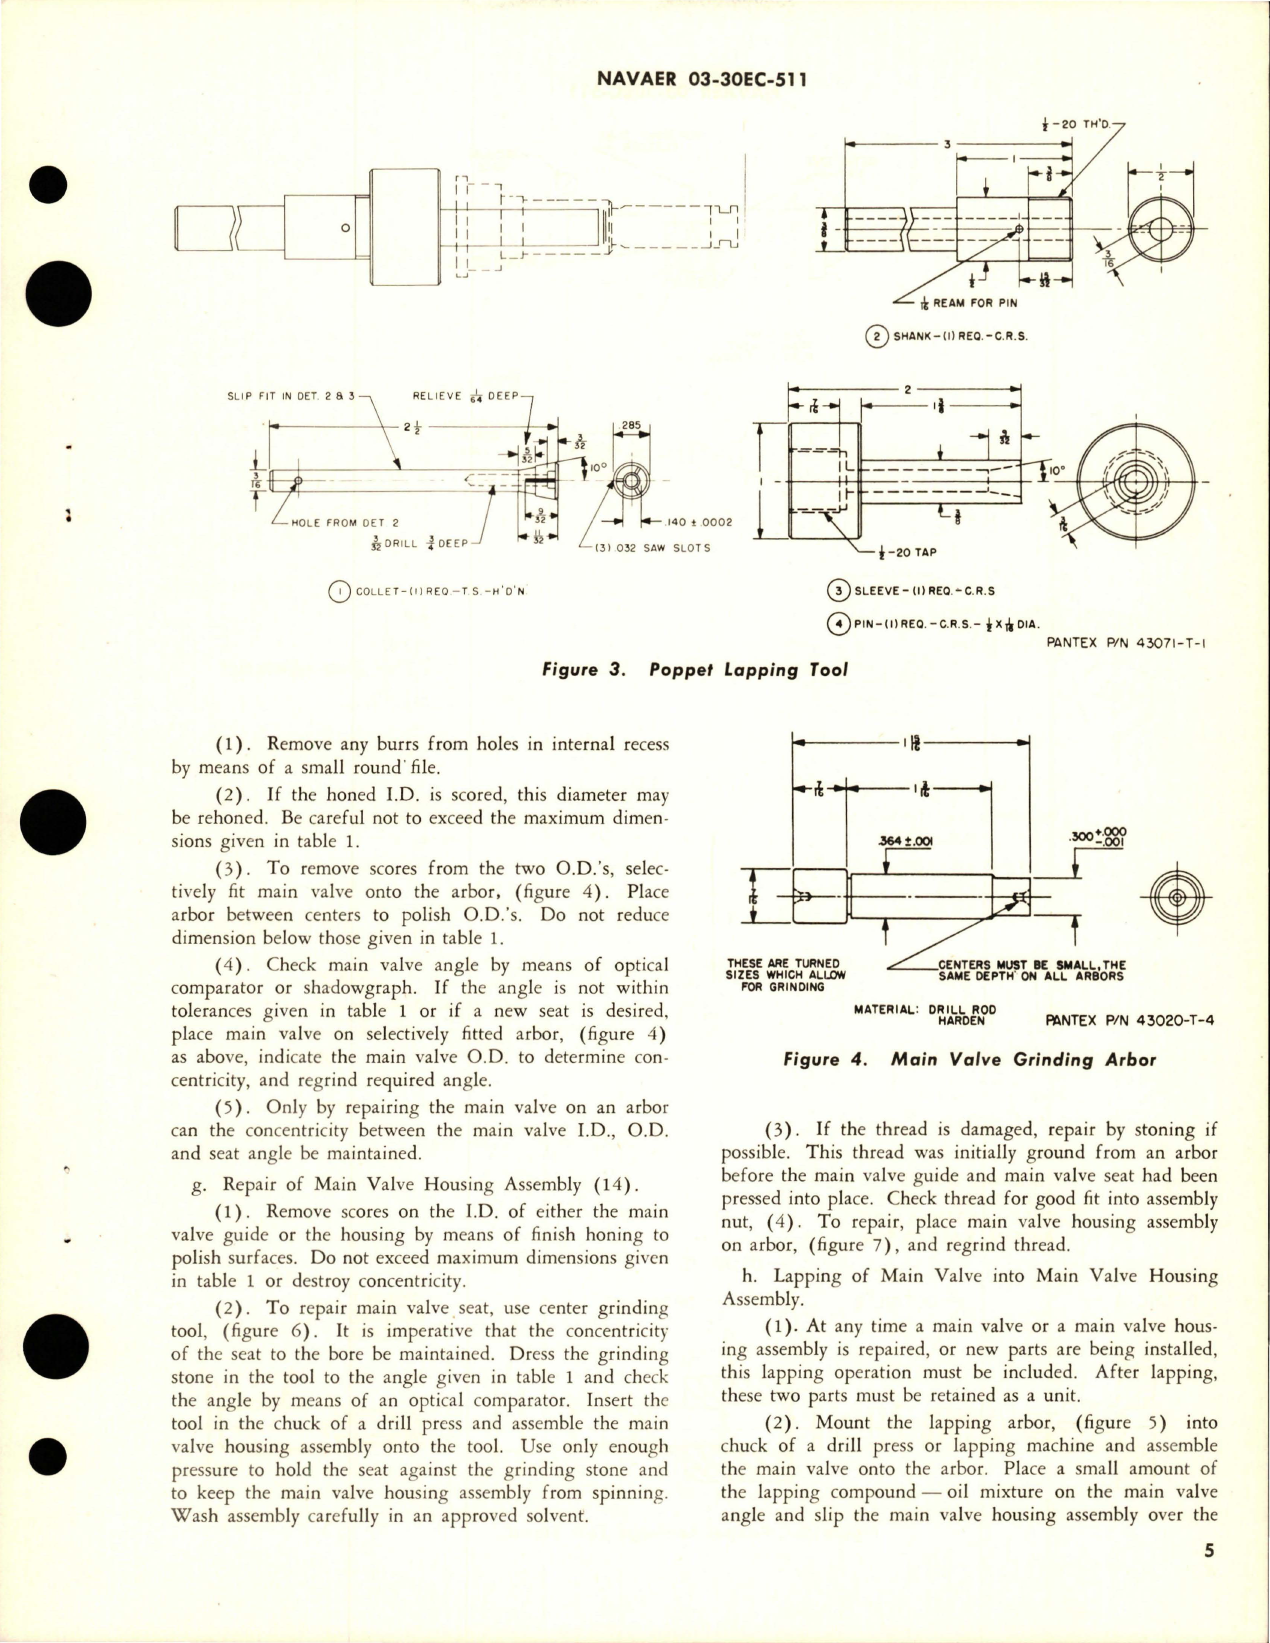 Sample page 5 from AirCorps Library document: Overhaul Instructions with Parts Breakdown for Hydraulic Pressure Relief Valve - AA-8-08 and AA-12-10A